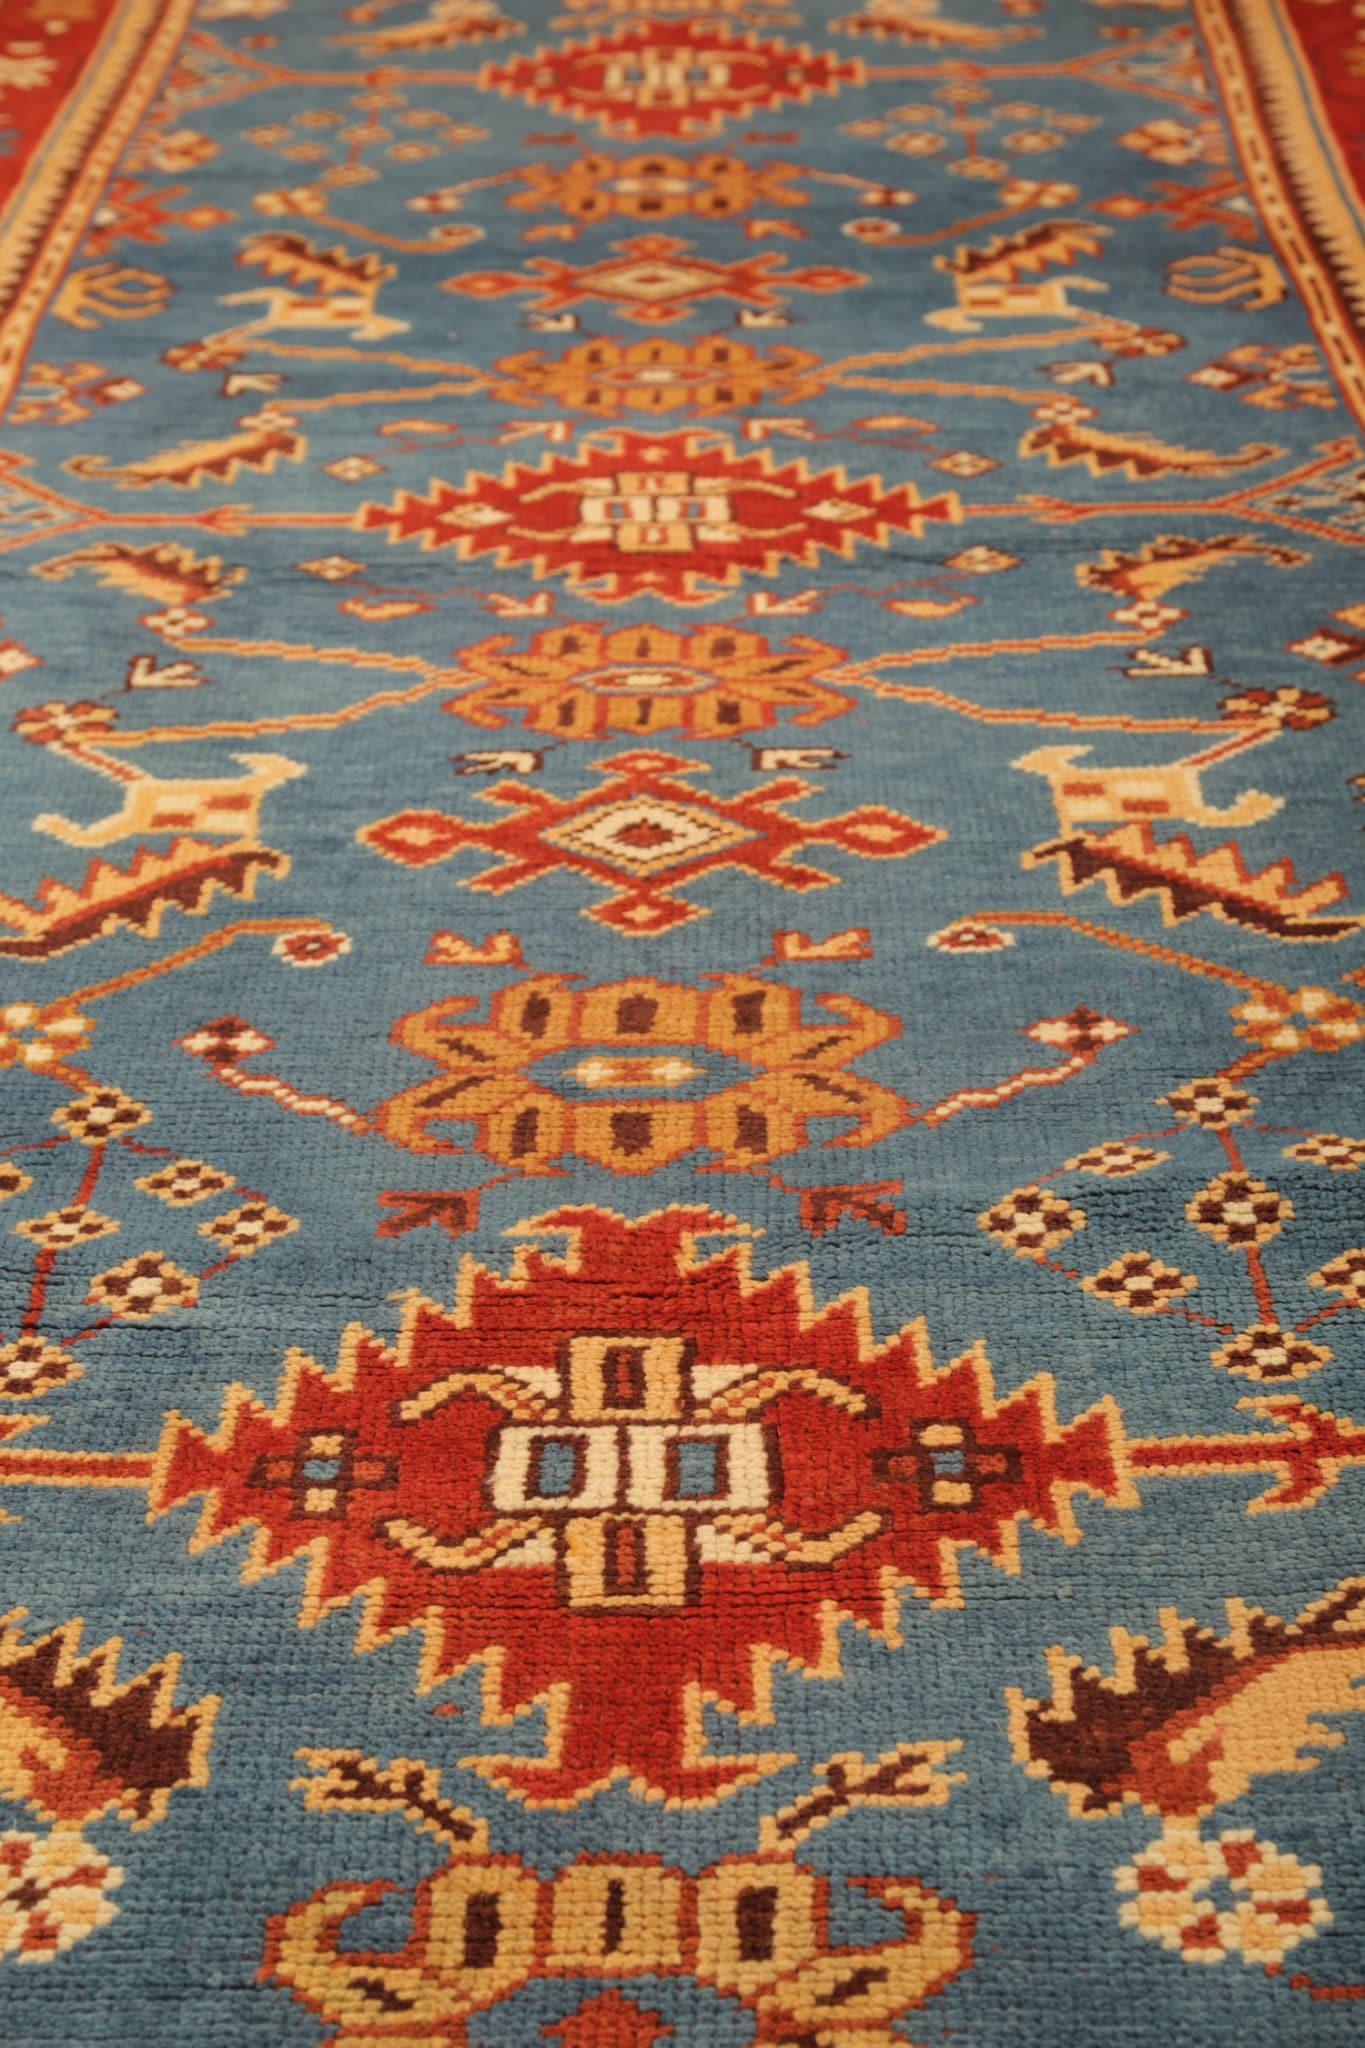 Cotton Vintage Rugs, Turkish Rugs, Oushak Carpets, Handmade Oriental Rug for Sale For Sale